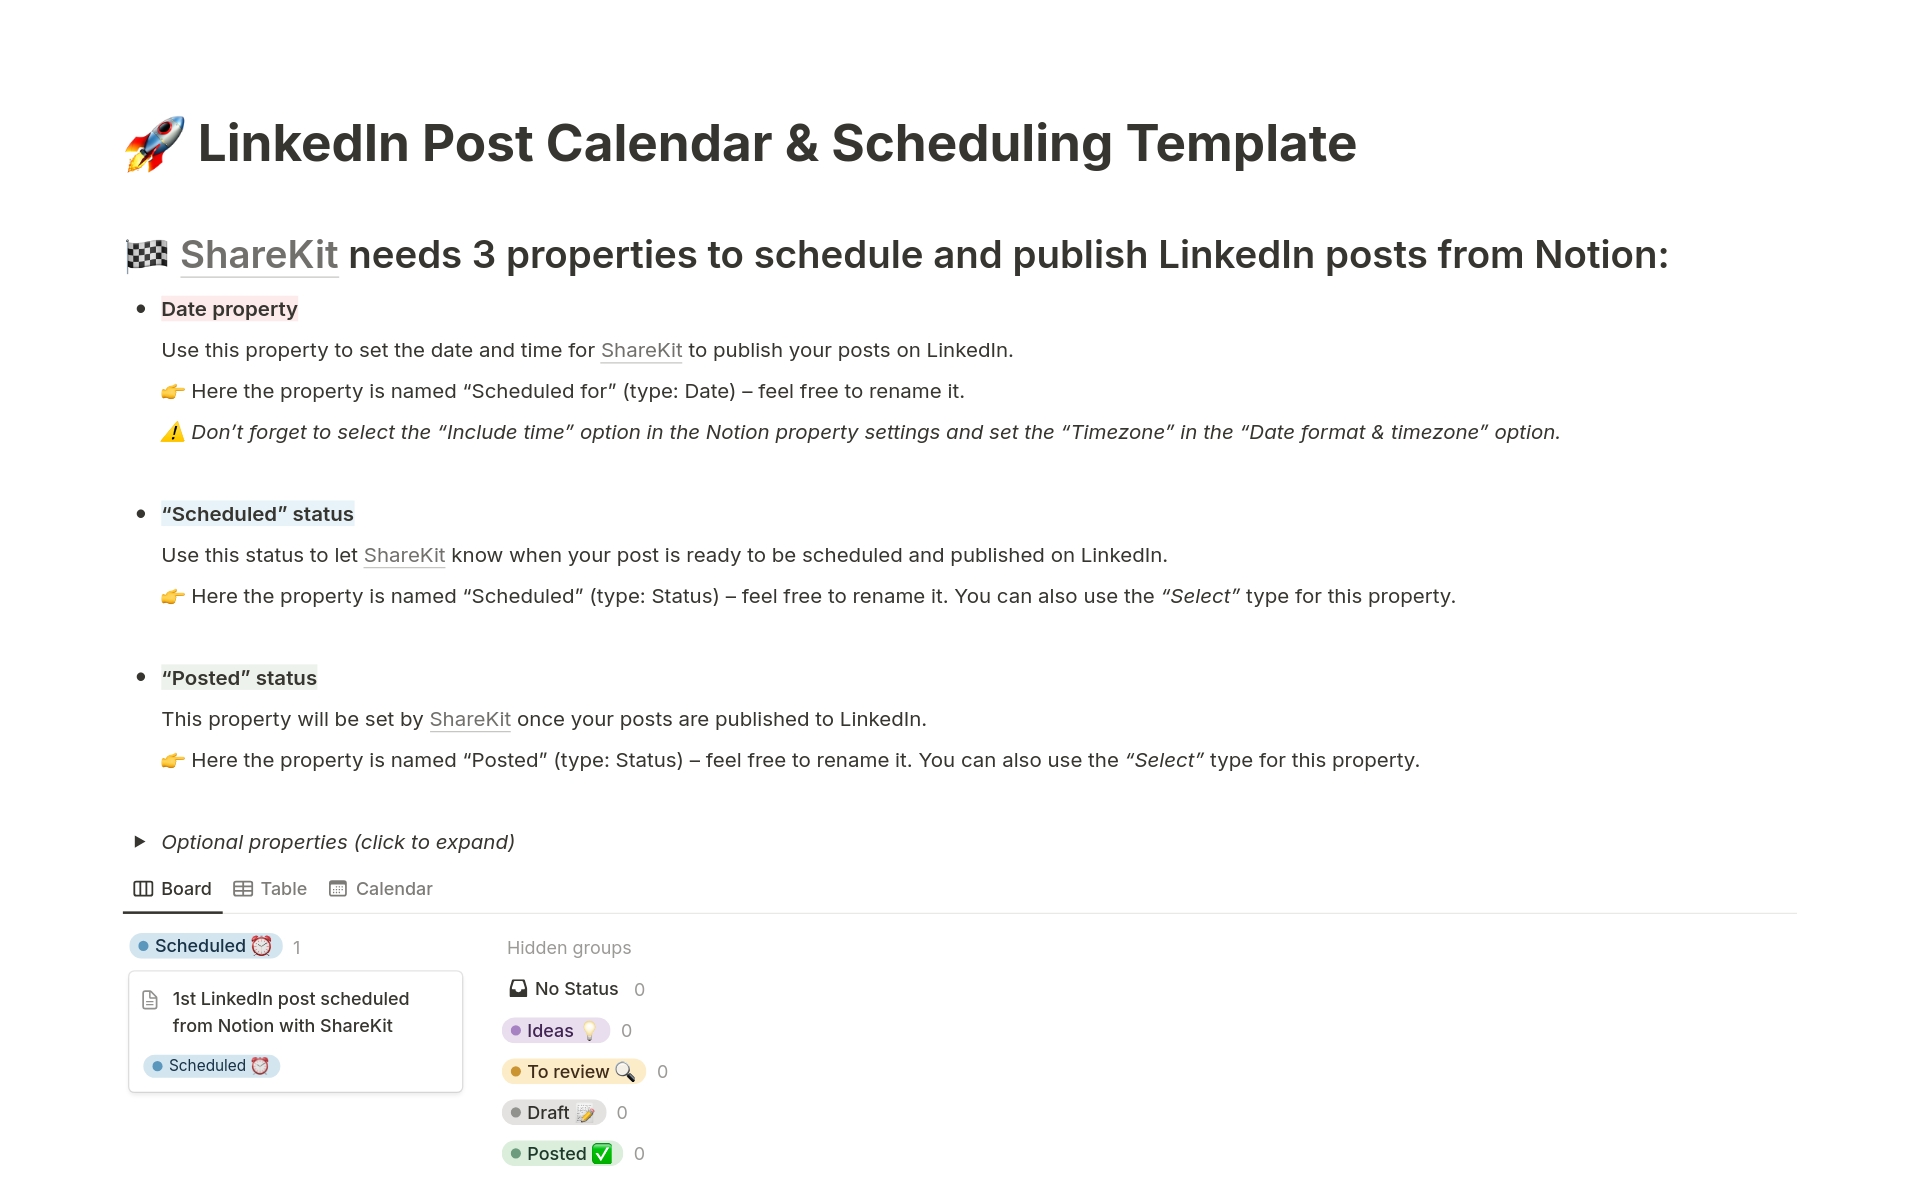 An easy-to-use LinkedIn Post and Content Calendar Template
📆 Stay consistent, get more followers on LinkedIn
⚡️ Different statuses to keep track of content steps (Ideas, Draft, To review, Scheduled, Posted)
🤖 Connect it to ShareKit and automatically post to LinkedIn from Notion